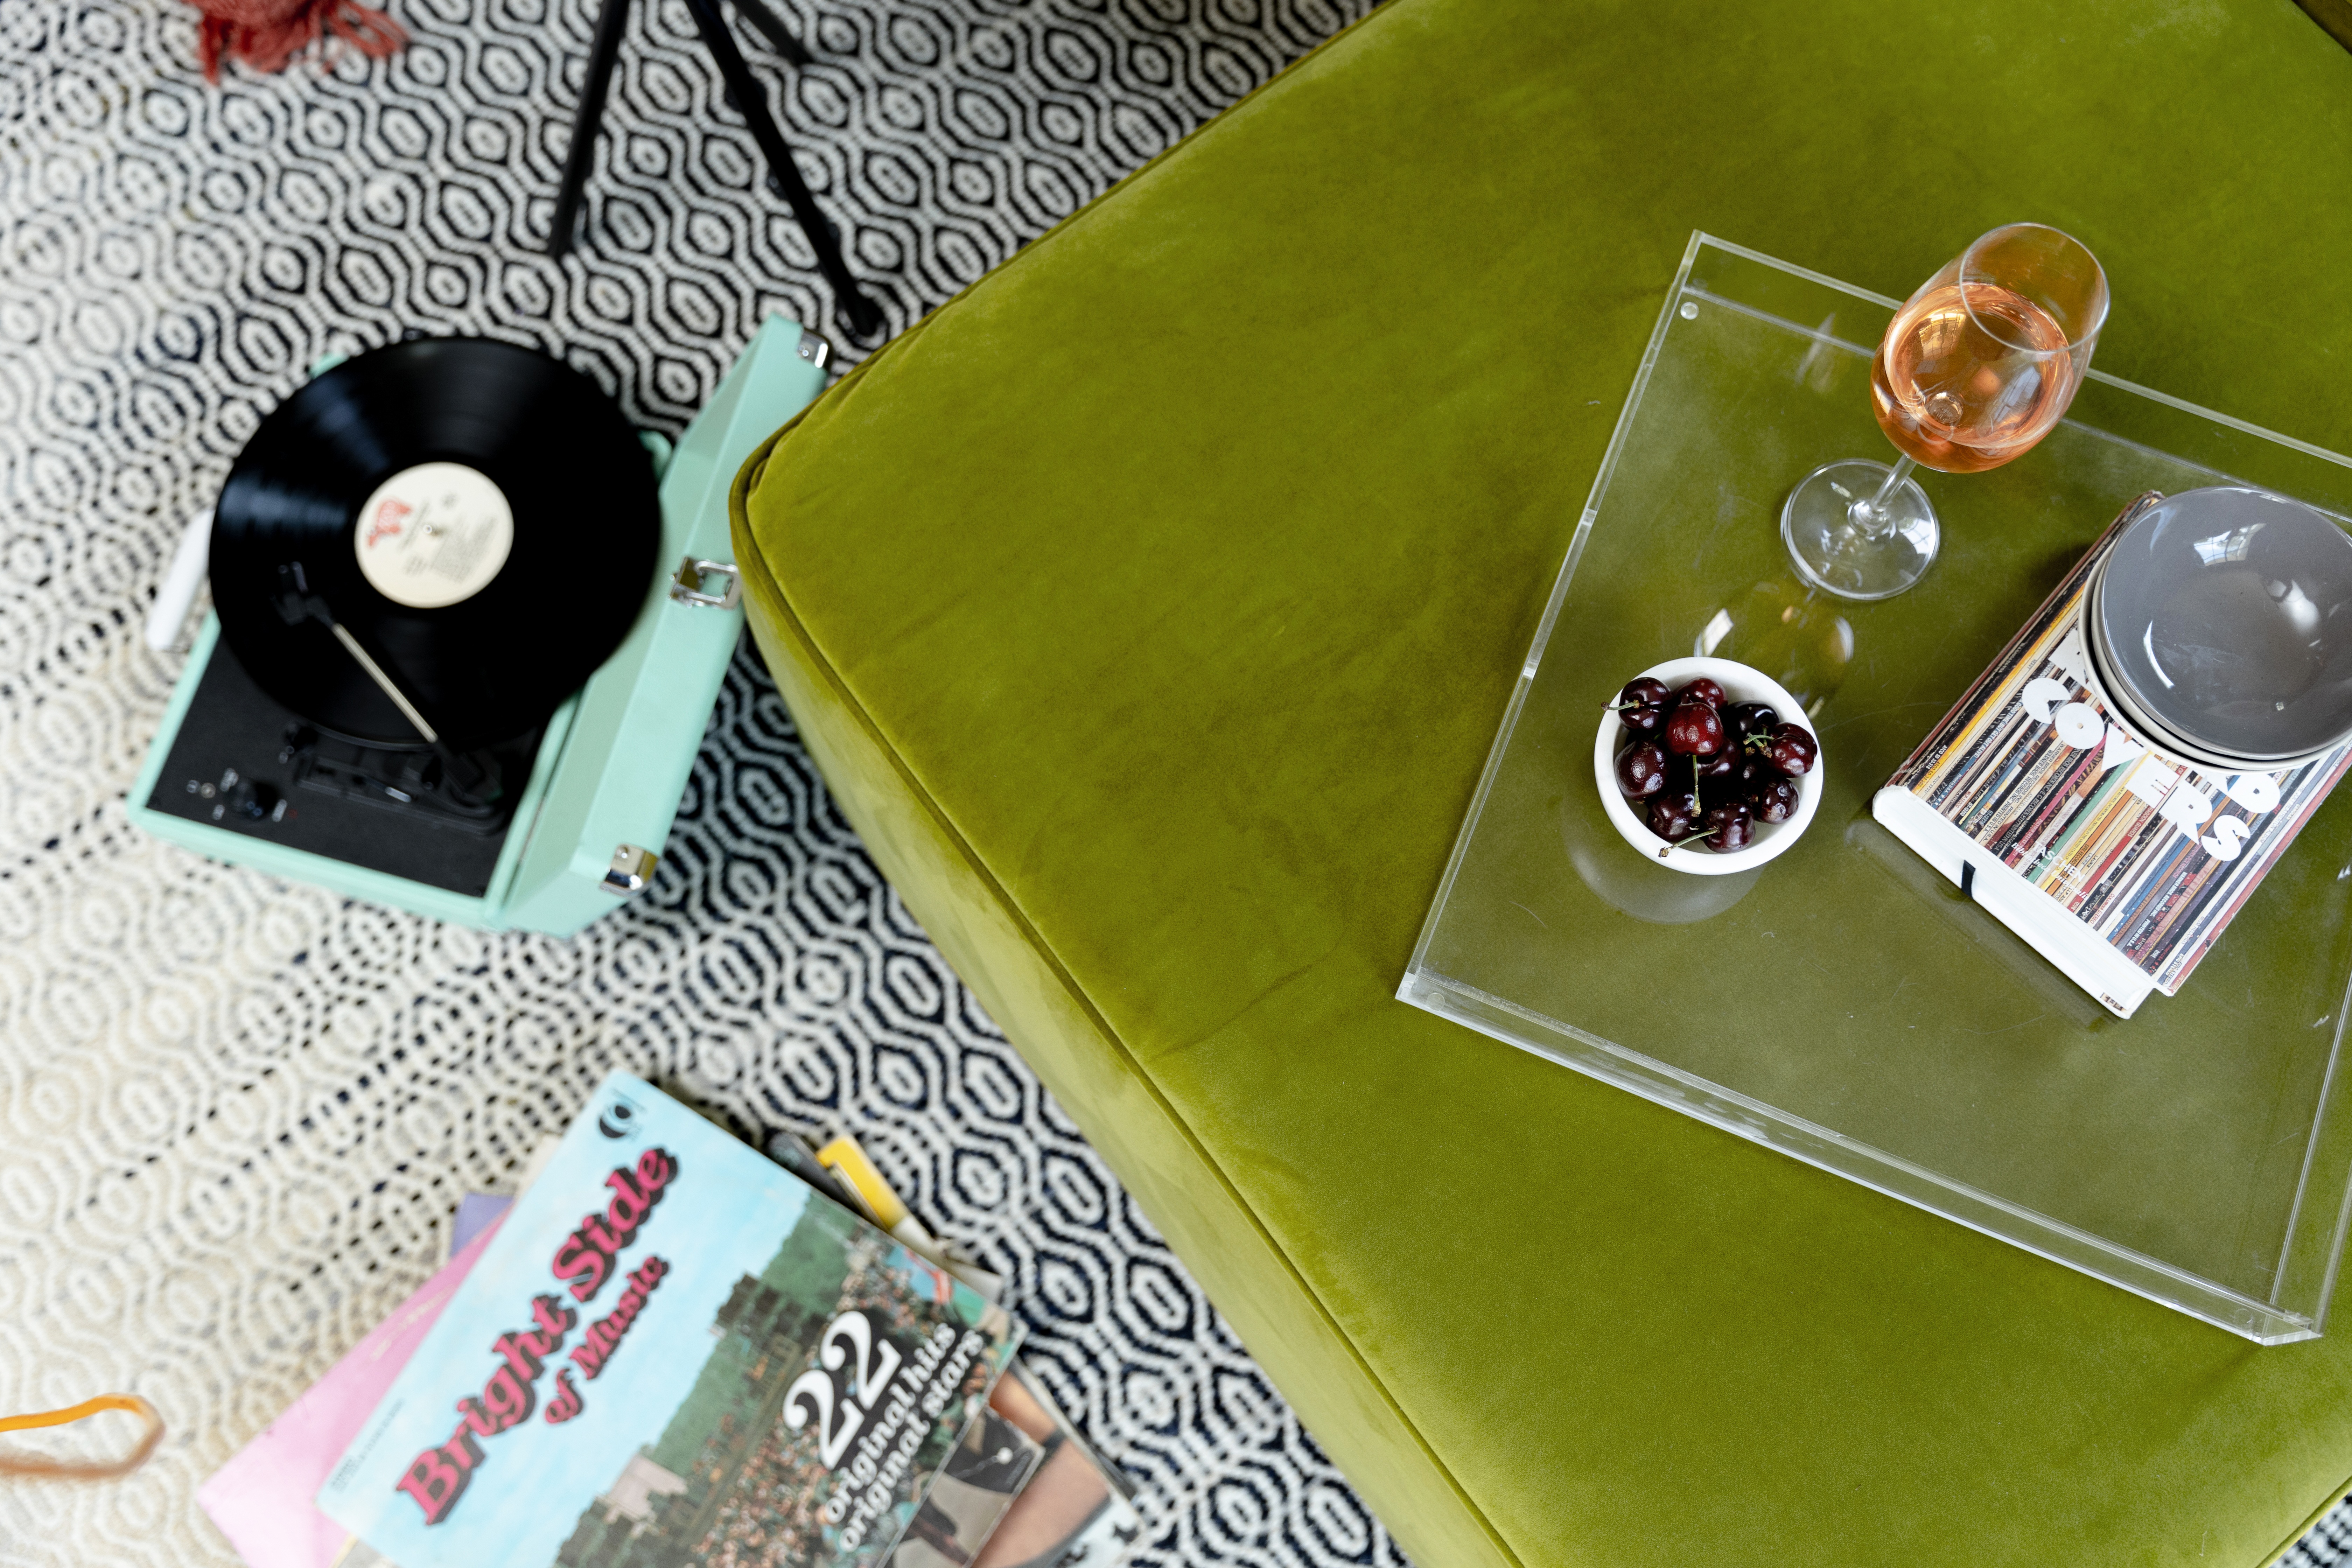 What Are The Best Vinyl Records To Add To Your Collection? ‐ Atlas